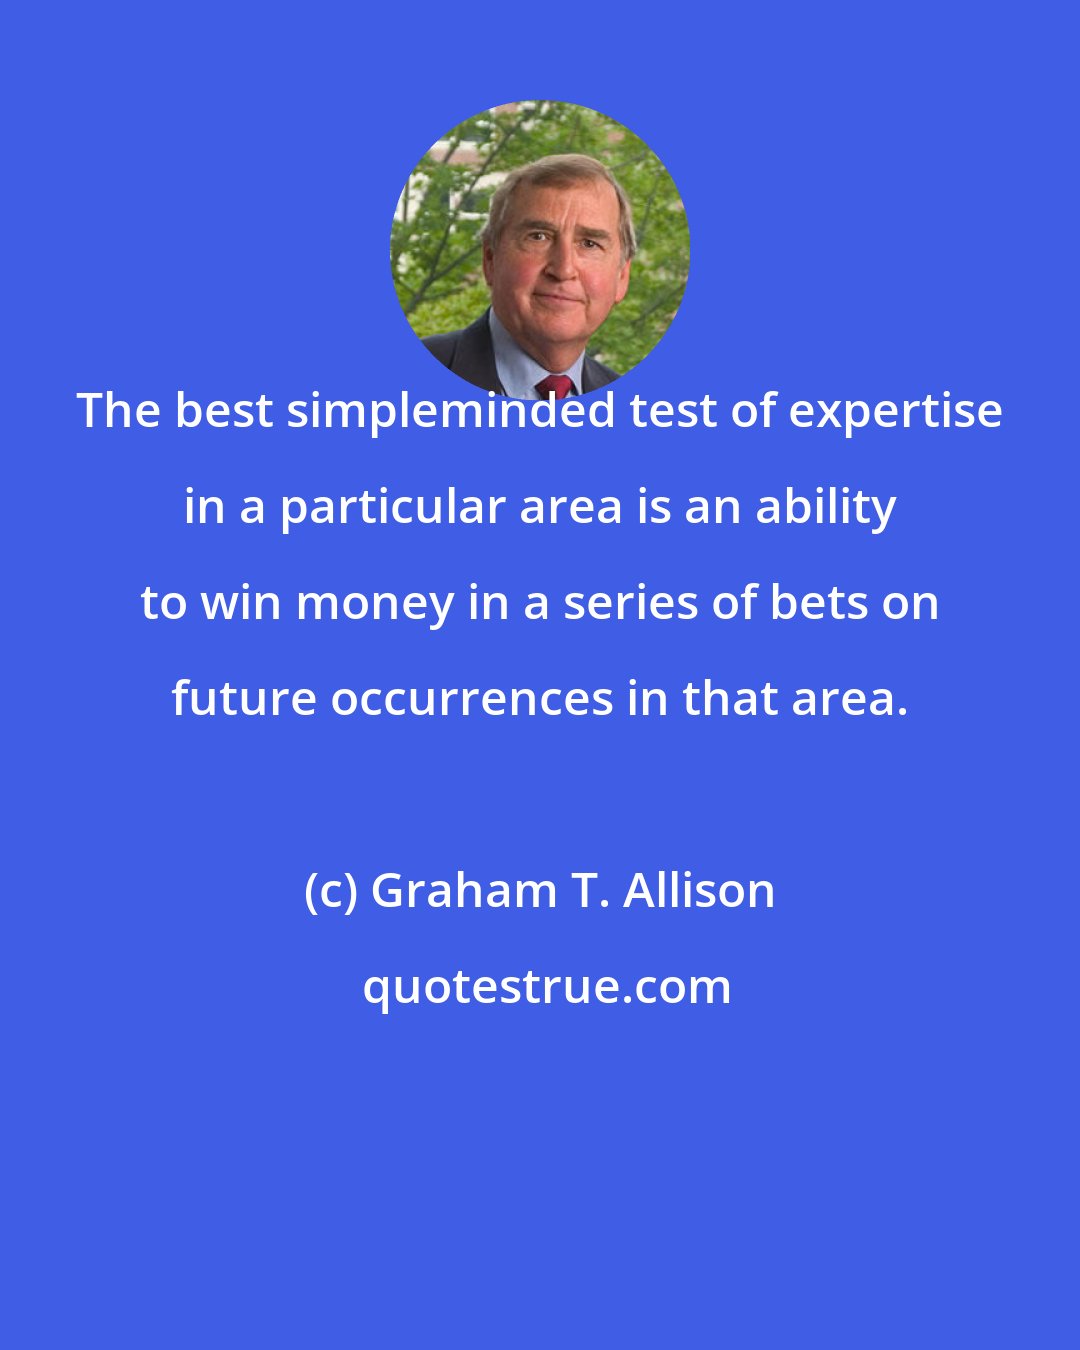 Graham T. Allison: The best simpleminded test of expertise in a particular area is an ability to win money in a series of bets on future occurrences in that area.